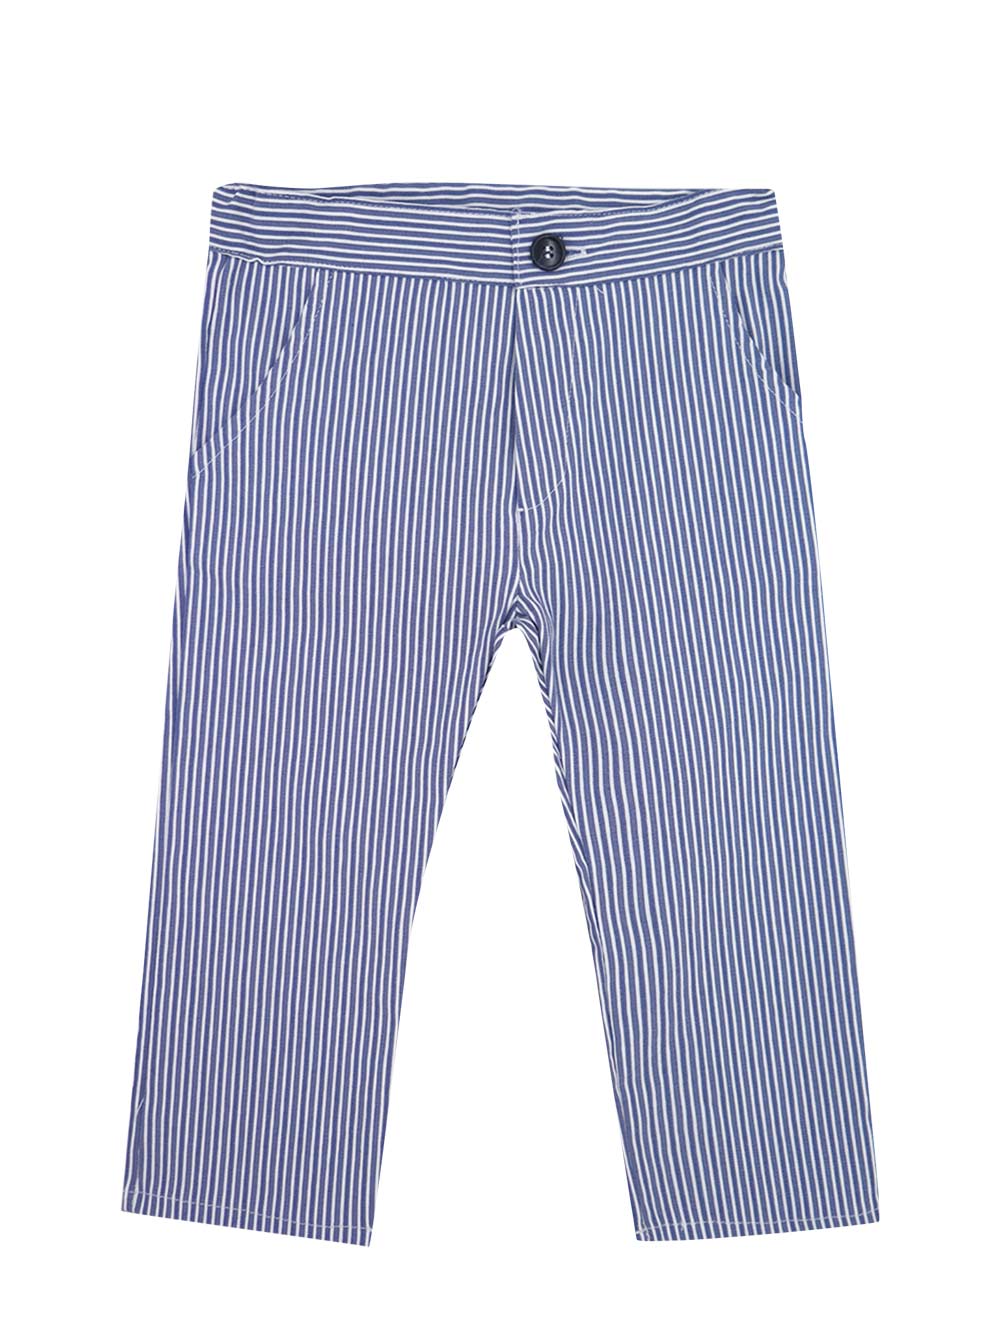 Blue White Striped Trousers